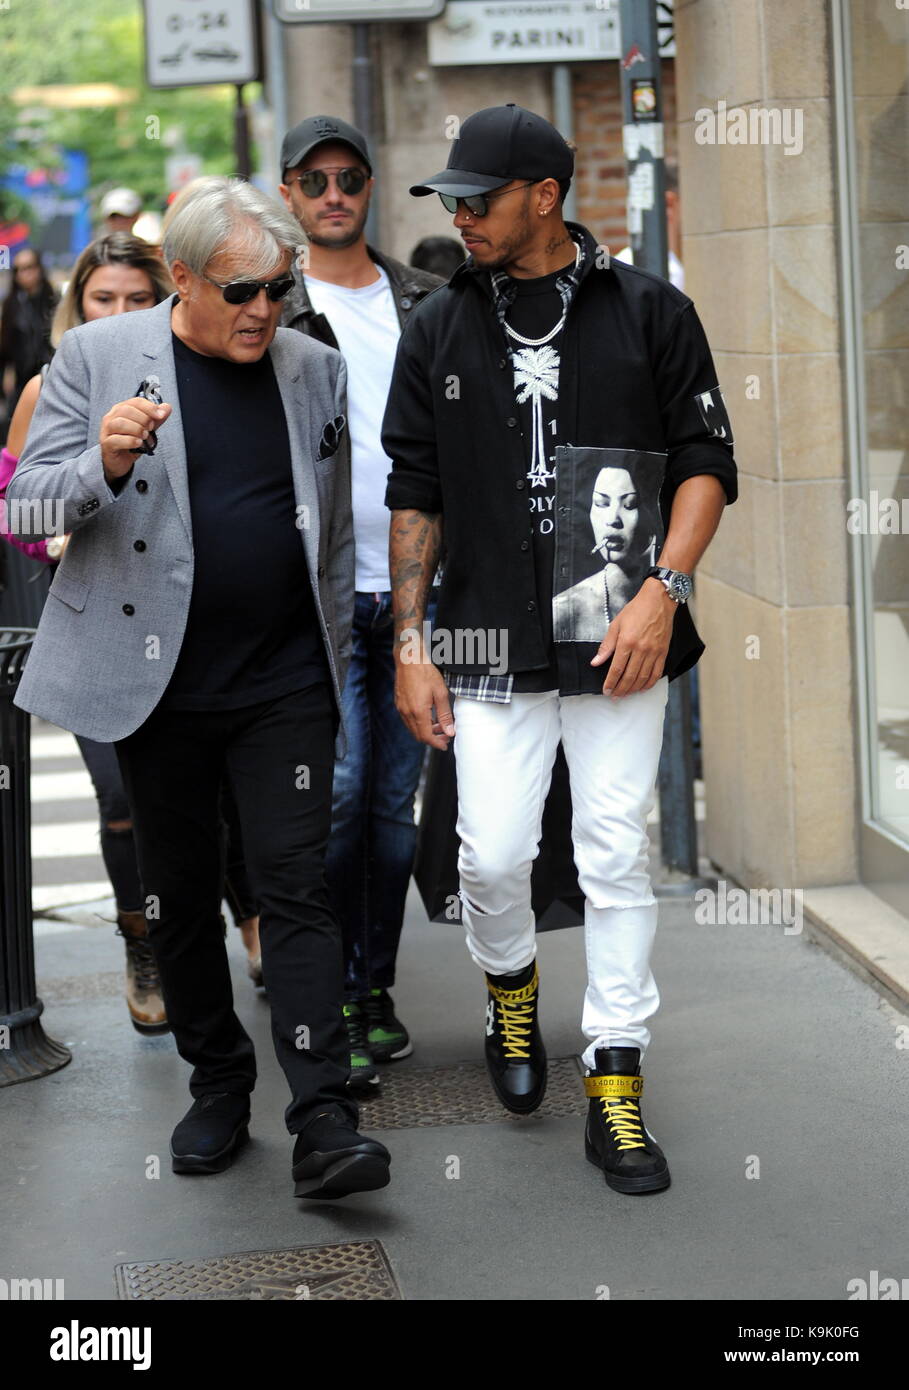 Shopkeeper hit auxiliary Milan, Italy. 23rd Sep, 2017. Lewis Hamilton leaves Giuseppe Zanotti's  boutique The English pilot LEWIS HAMILTON arrives in the center and enters  GIUSEPPE ZANOTTI's boutique to buy shoes. She goes out after